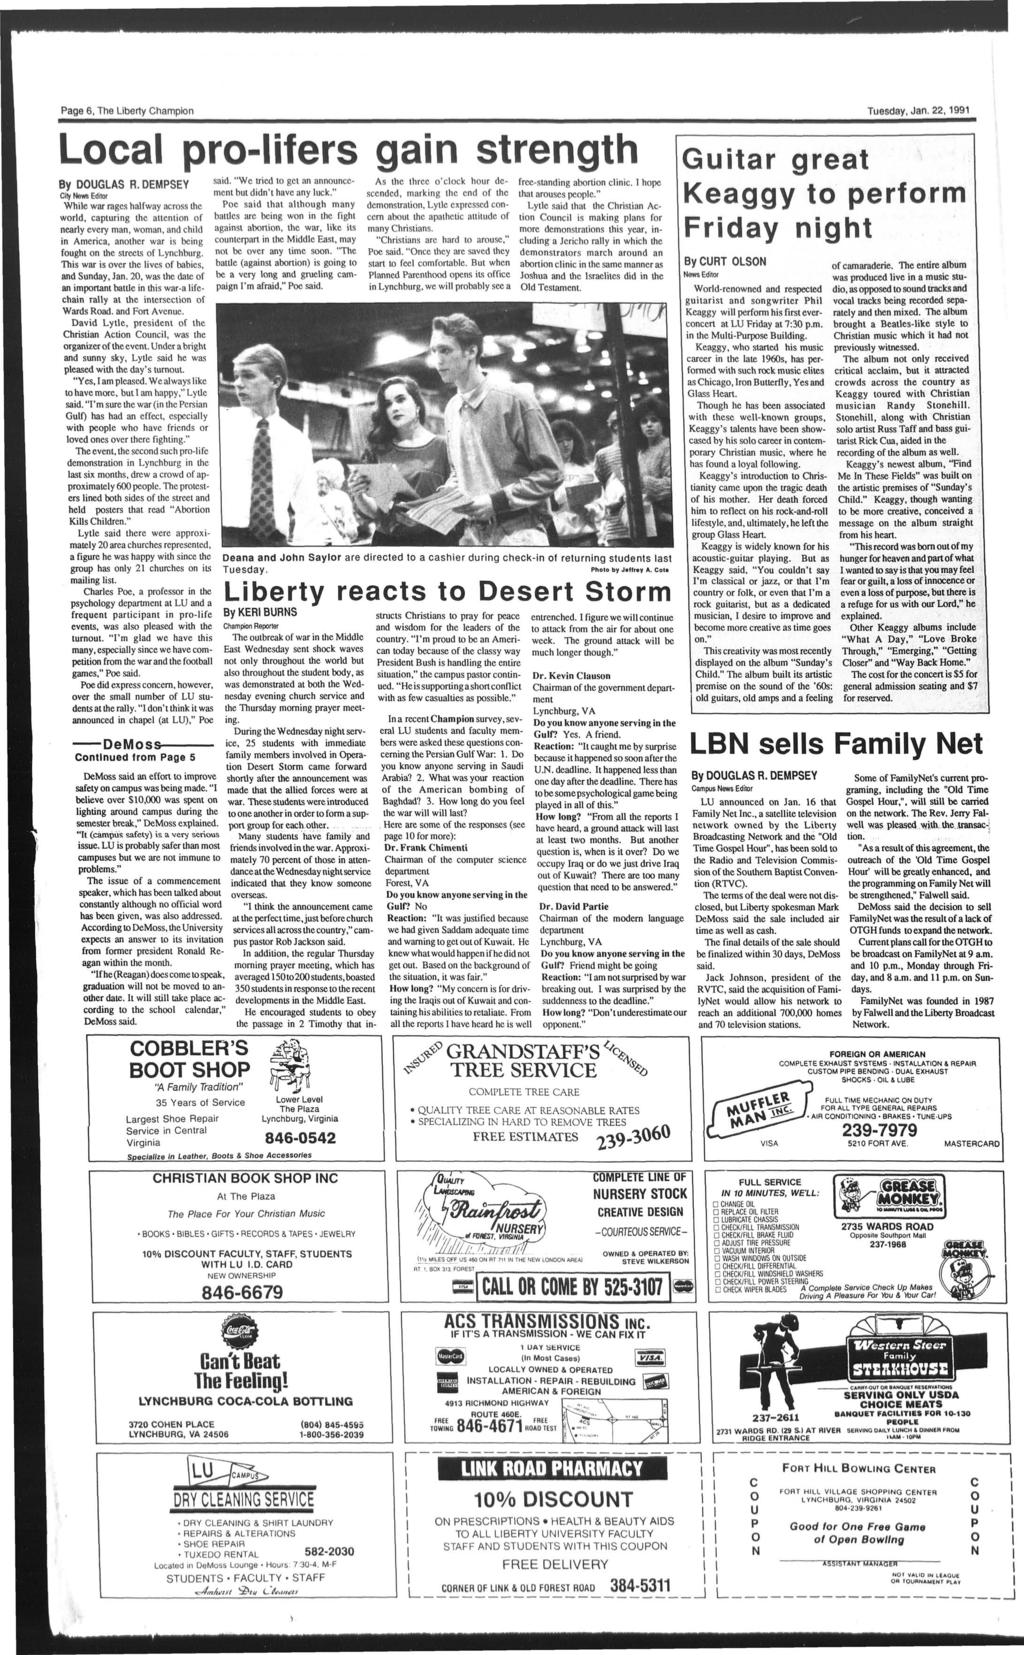 Page 6, The Lberty Champon Tuesday, Jan. 22,1991 Local pro-lfers gan strength By DOUGLAS R.DEMPSEY sad. "We tred to get an announcement but ddn't have any luck.